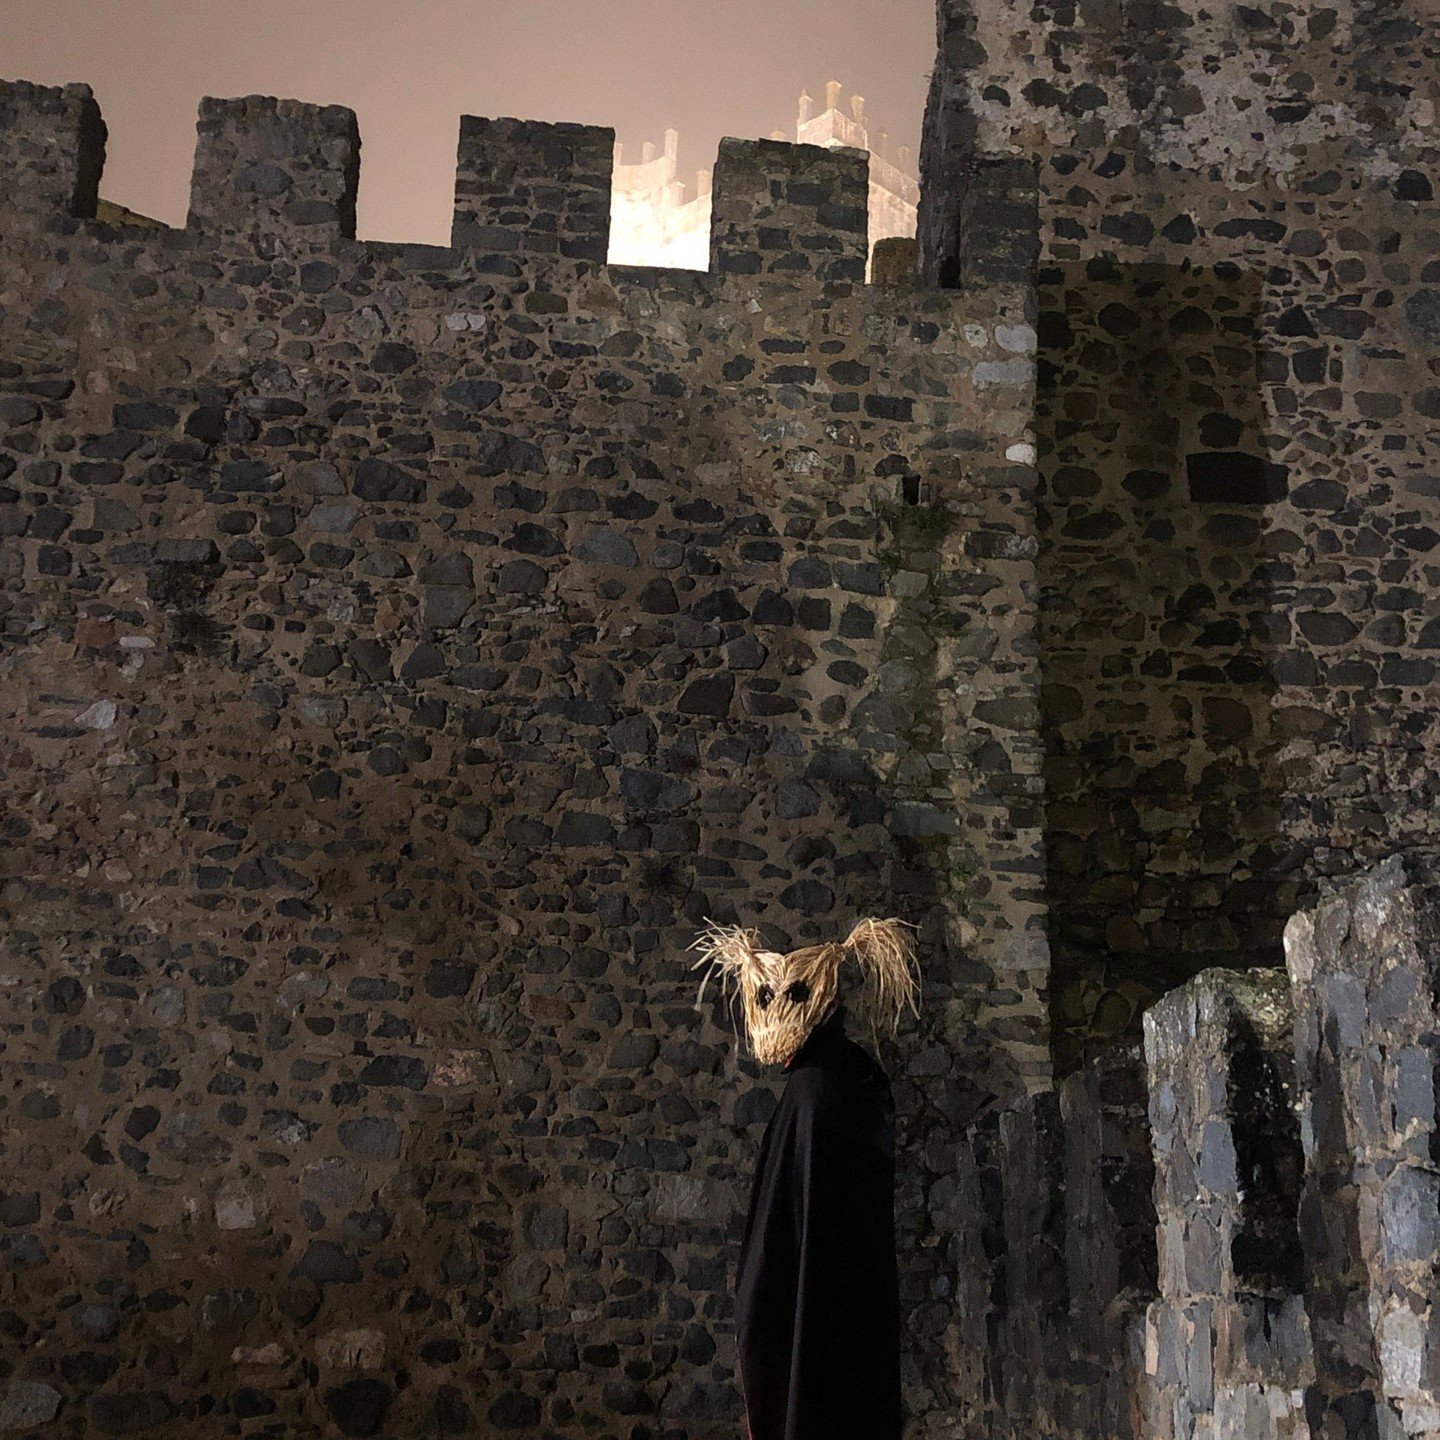 A mysterious and elusive presence lingers within the ancient walls of the castle, shrouded in a cloak of darkness. Its masked visage strikes fear into the hearts of those who dare to venture near. Whispers of its haunting presence echo through the co